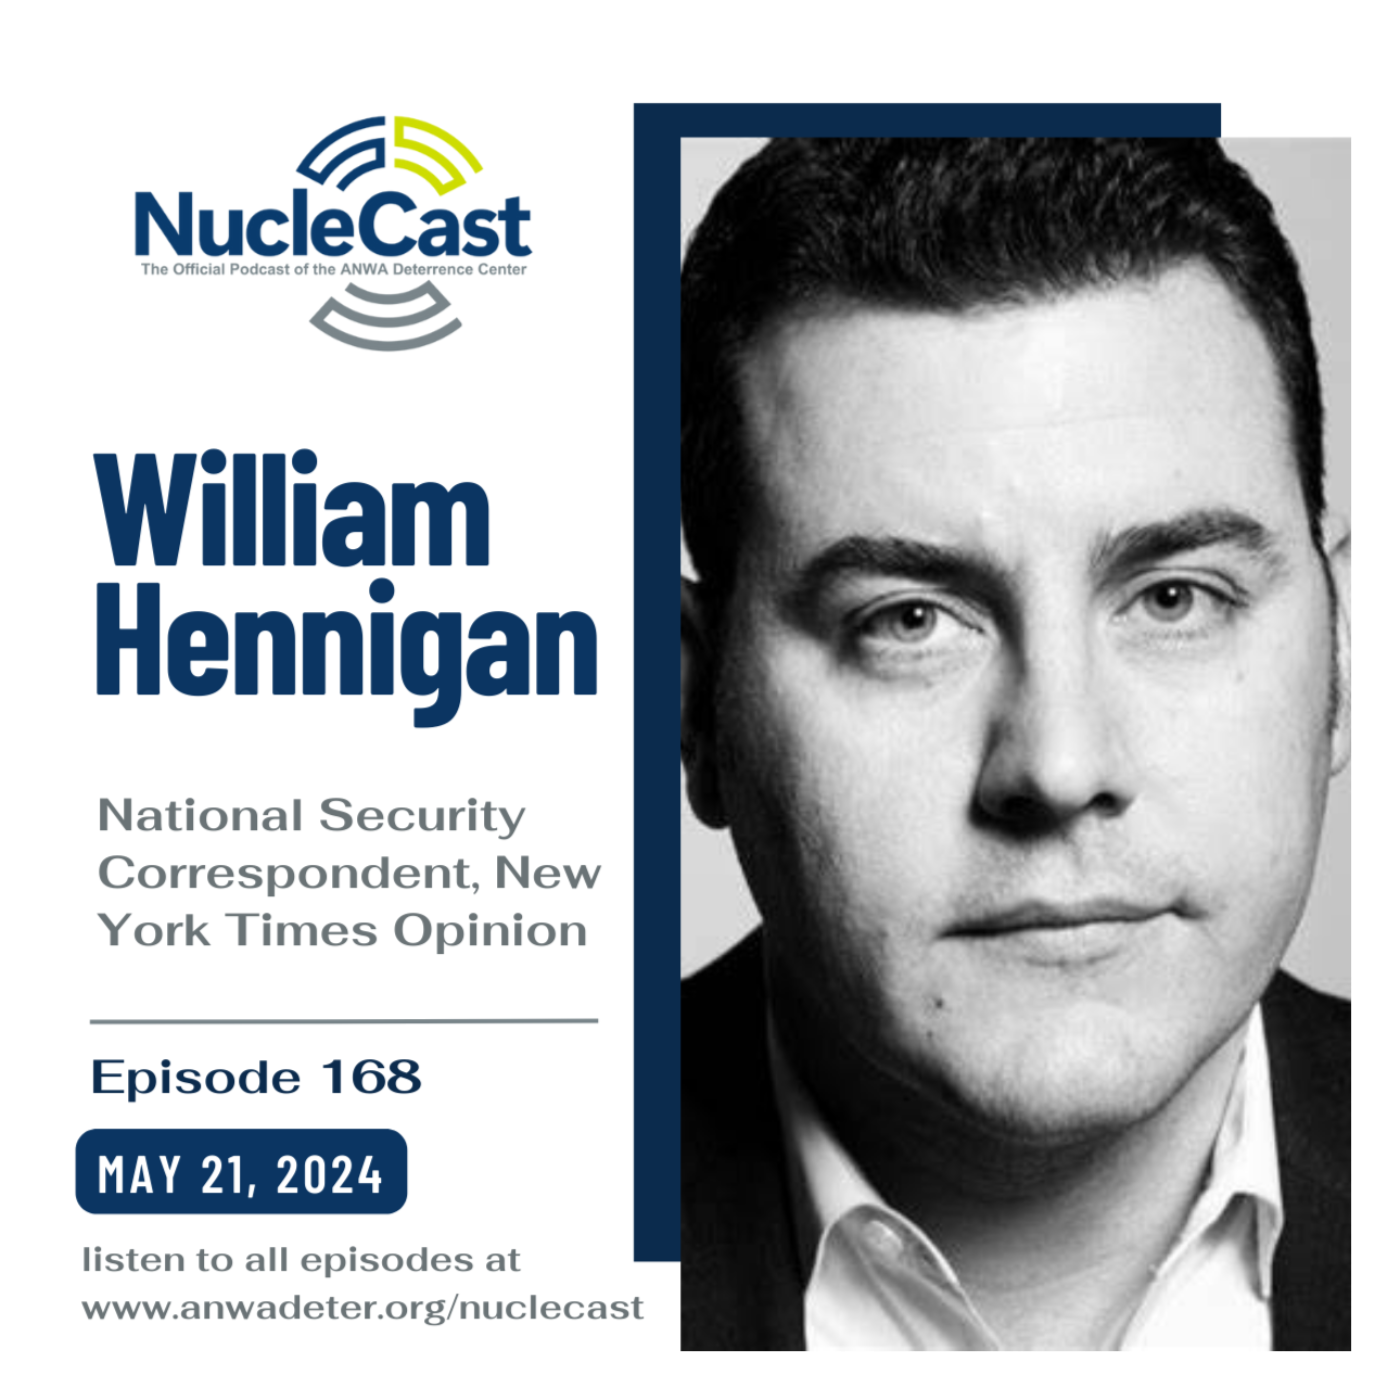 William Hennigan - Bringing Nuclear Issues to the Forefront for Everyday People